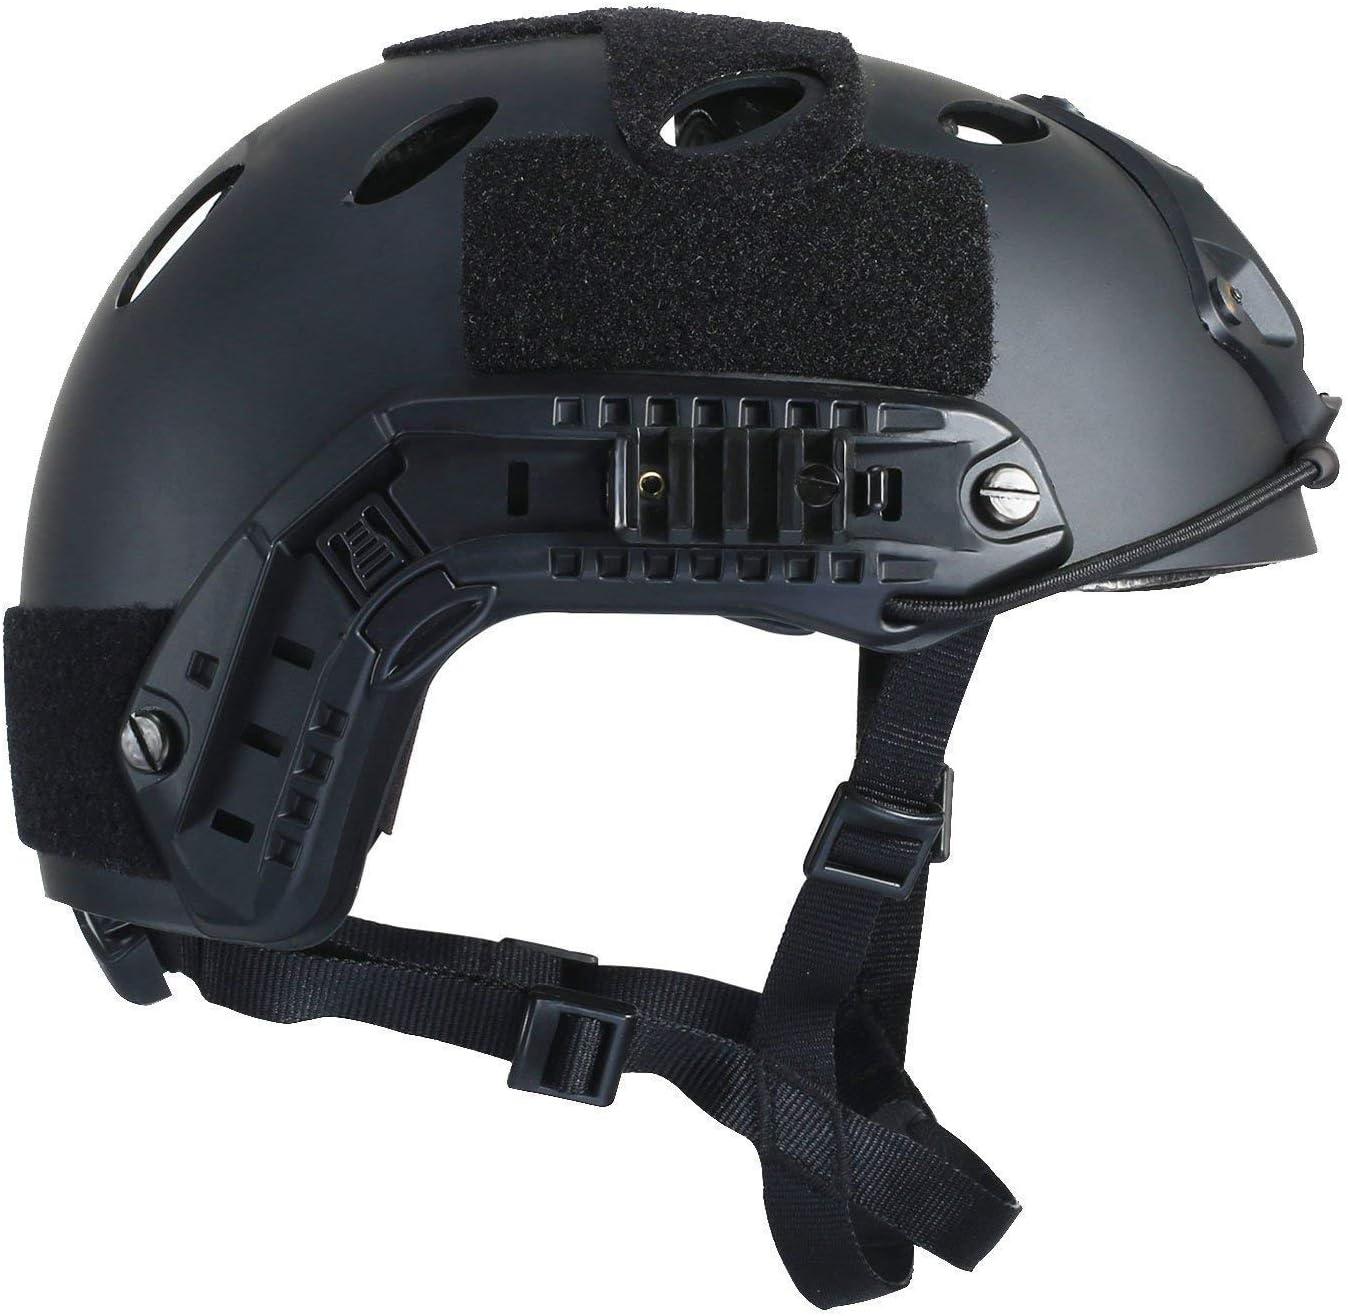 Tactical Jumping Head Helmet For Airsoft, Paintball, And Outdoor Sports  Fast MH PJ Casco Motorcycle Personal Protective Equipment Model: Dsfwaed  231113 From Xuan09, $44.47